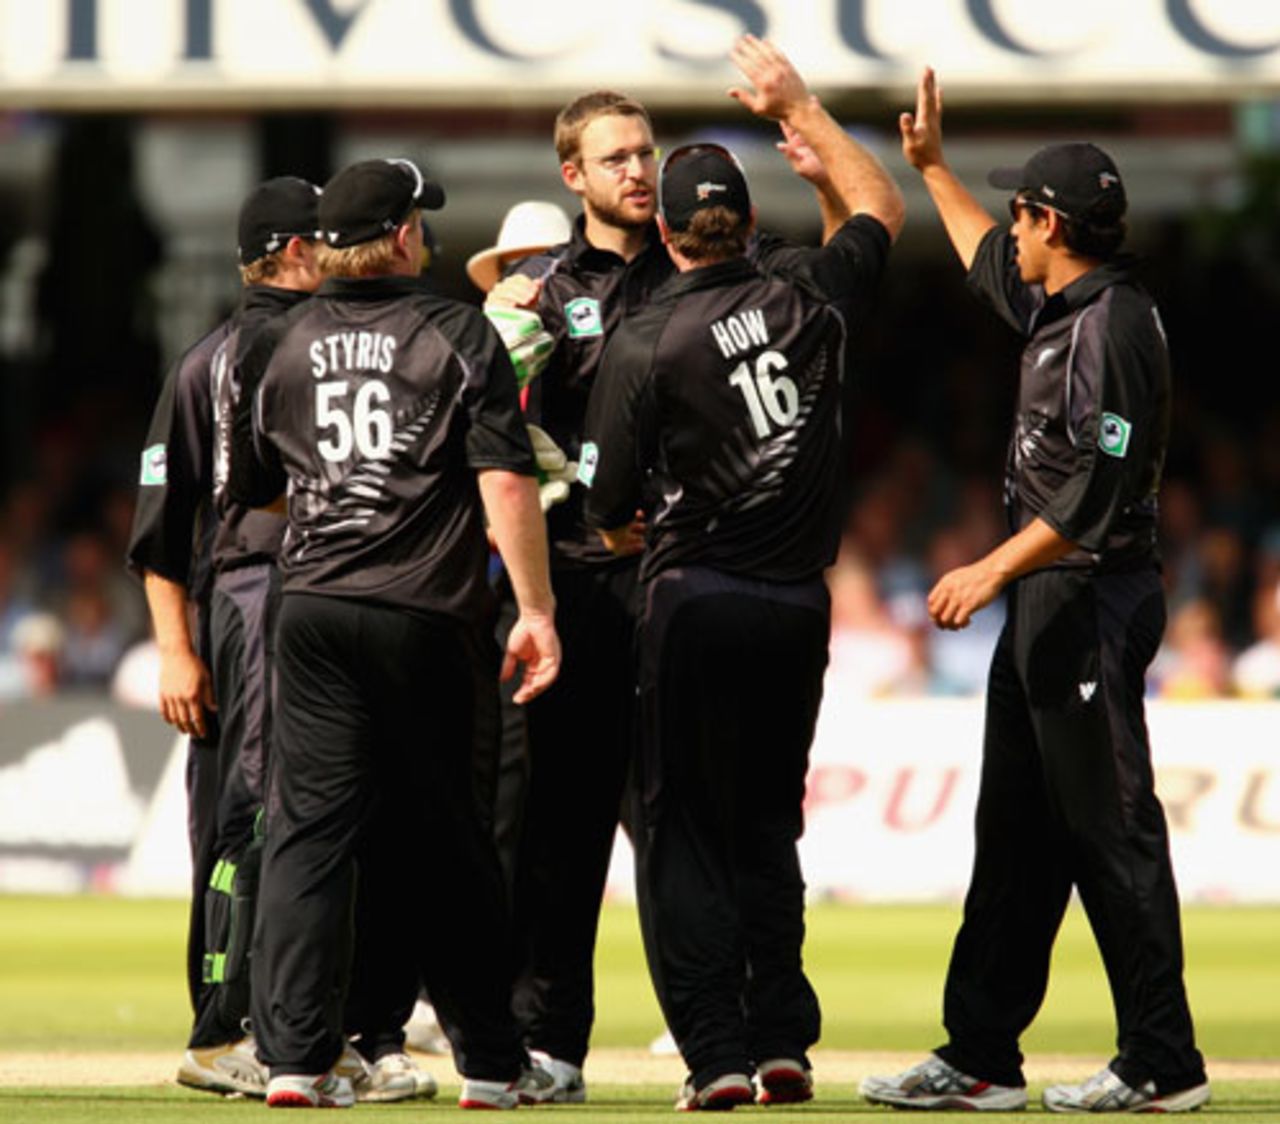 Daniel Vettori led from the front, England v New Zealand, 5th ODI, Lord's, June 28, 2008